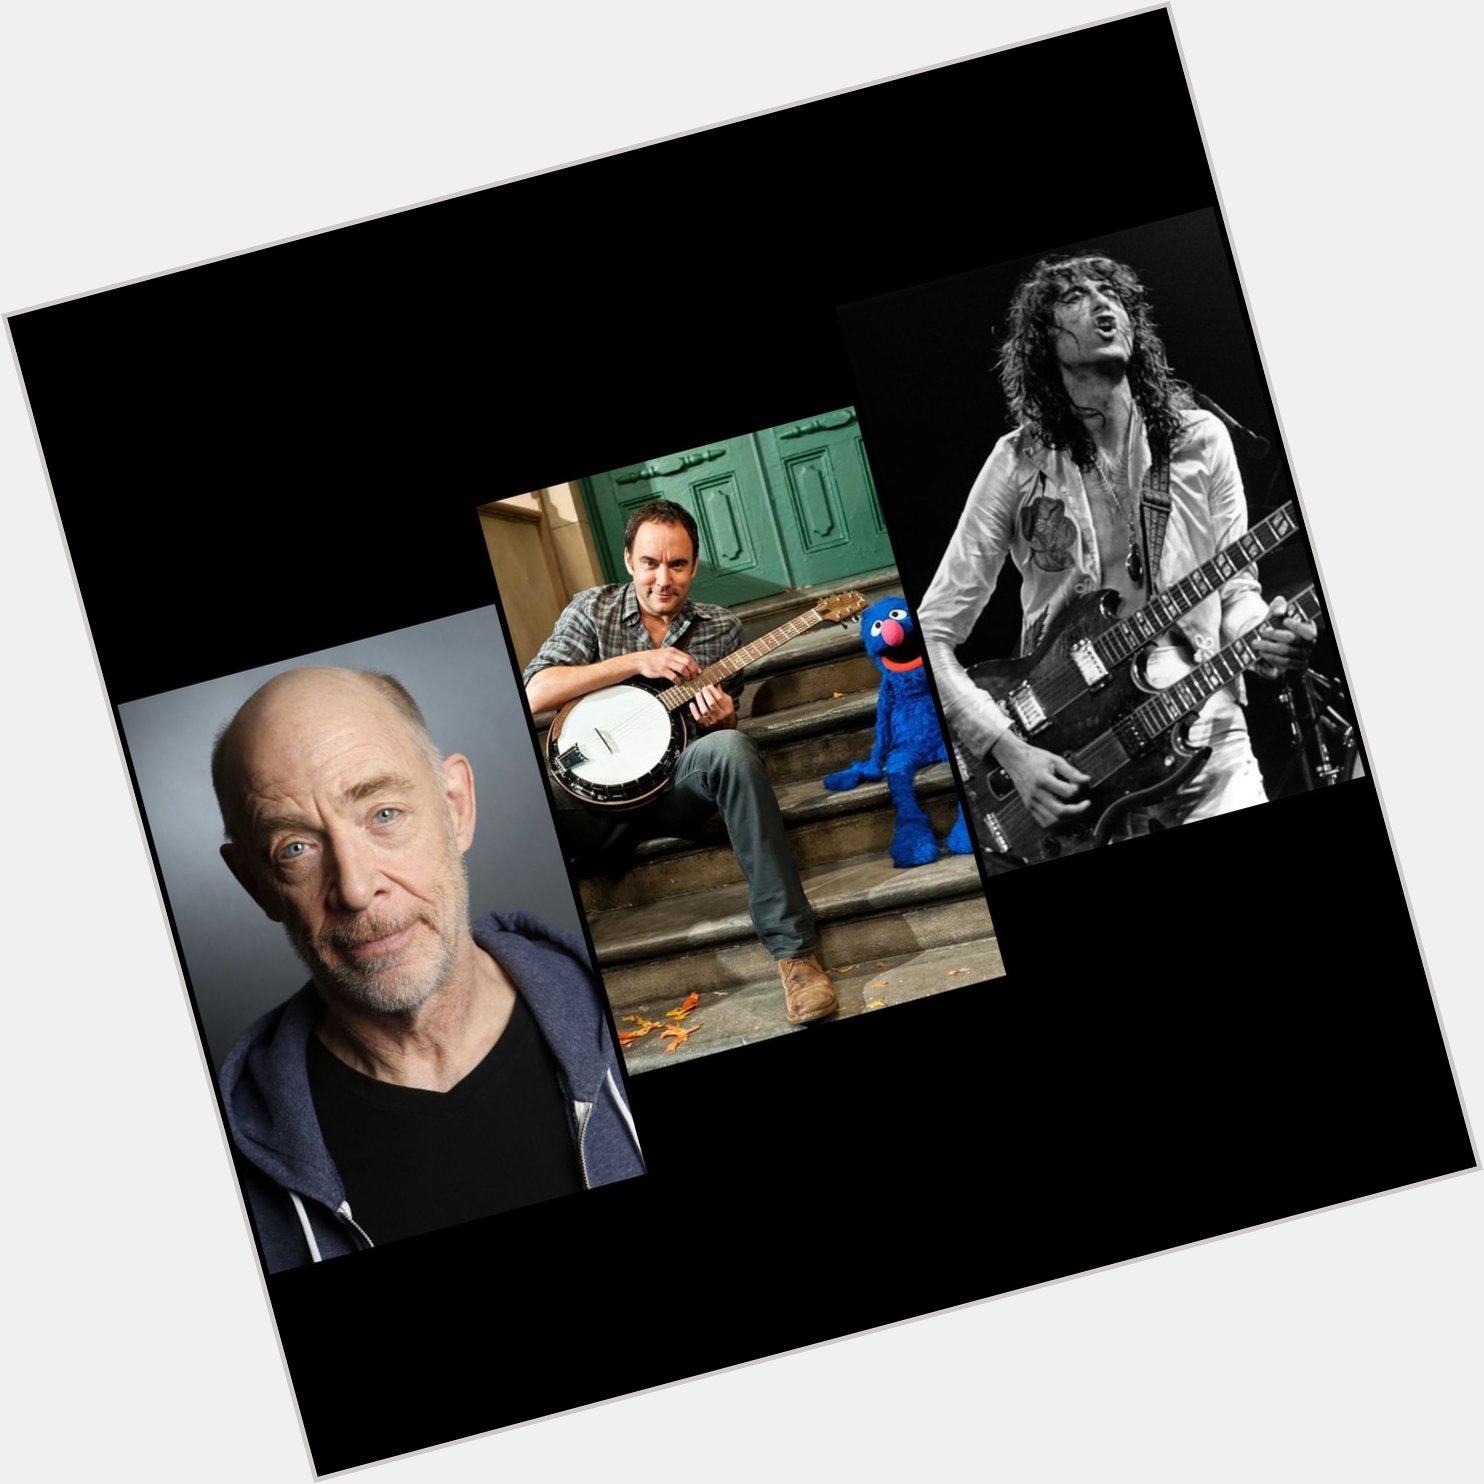 Wishing a Happy Birthday to Actor JK Simmons and Legendary Guitarists Dave Matthews and  